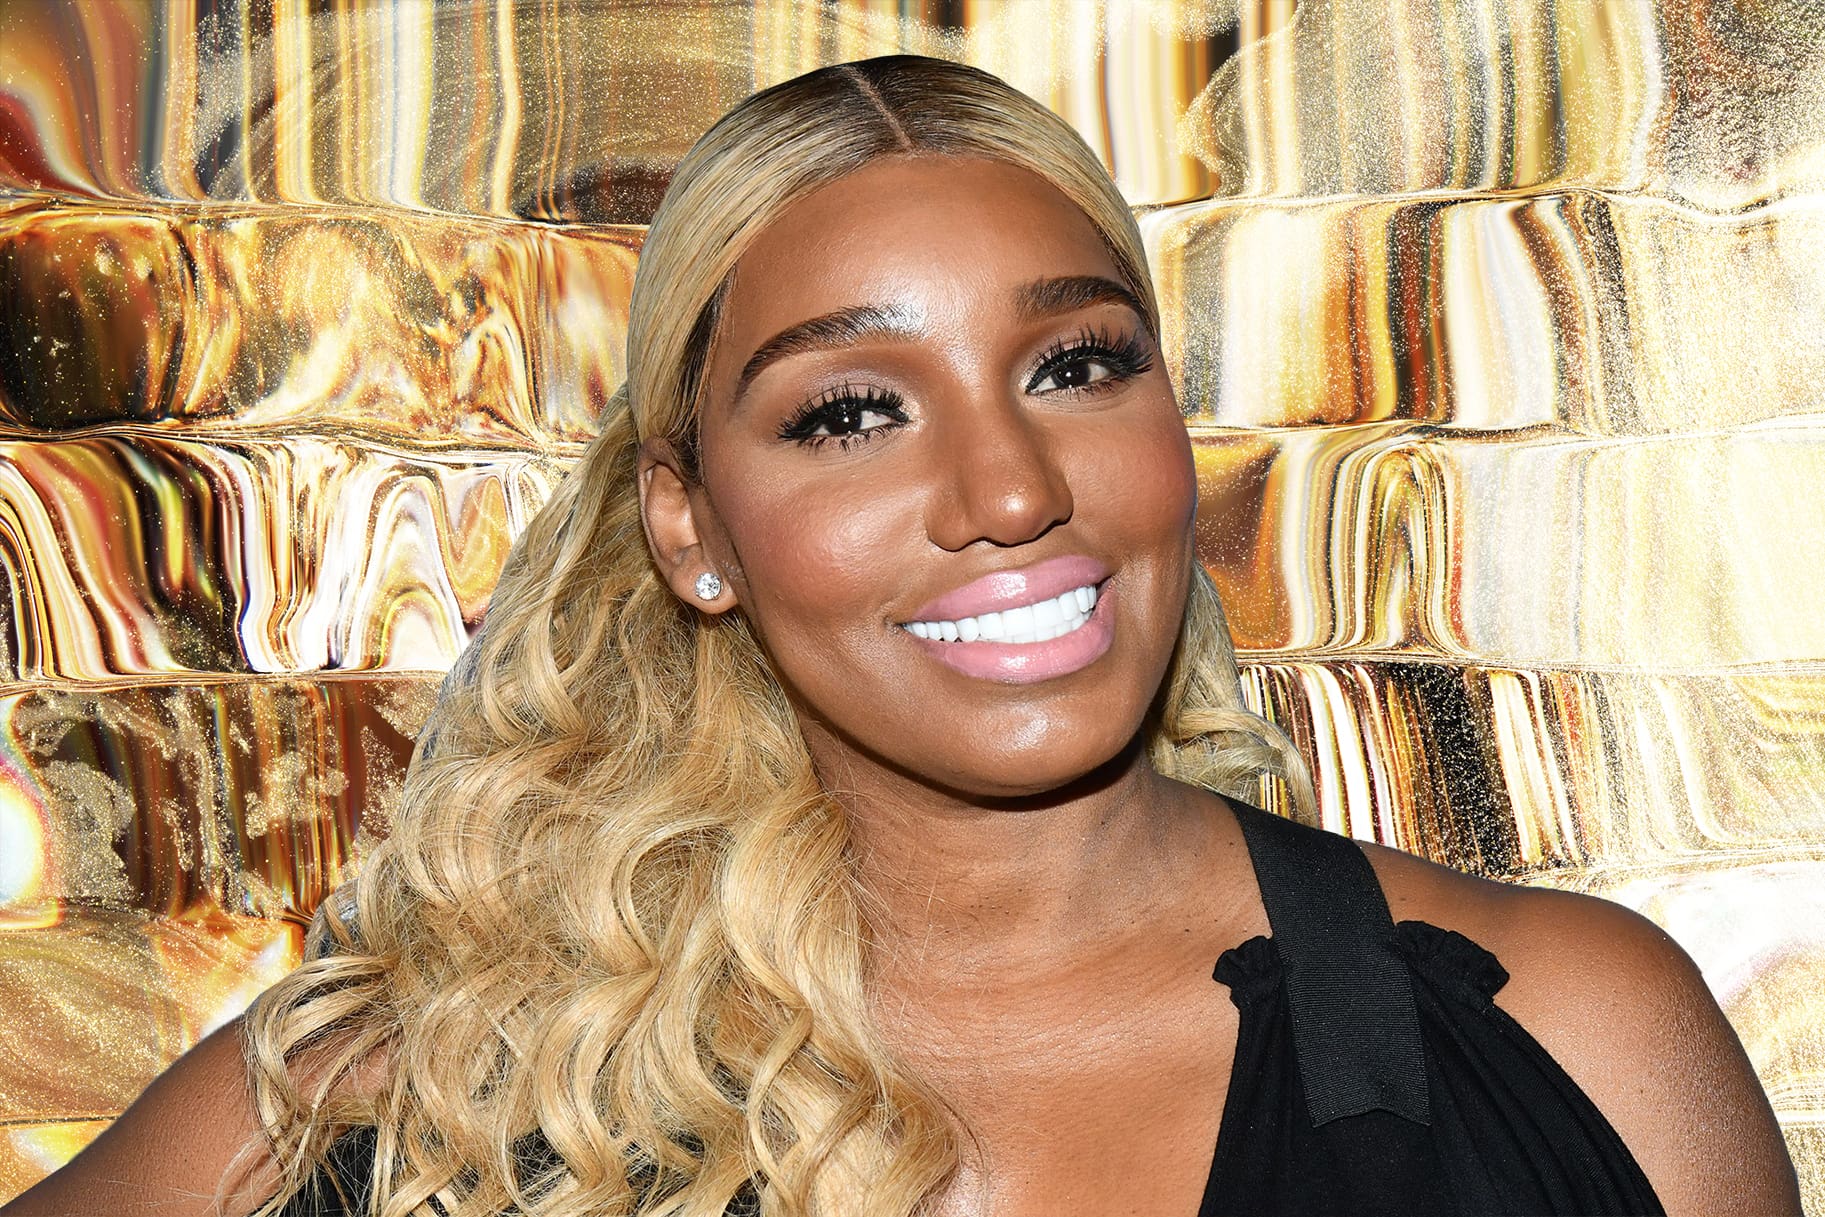 NeNe Leakes Amazes Fans With The Latest Look That She's Flaunting - See Her Cleavage And Unrecognizable Face